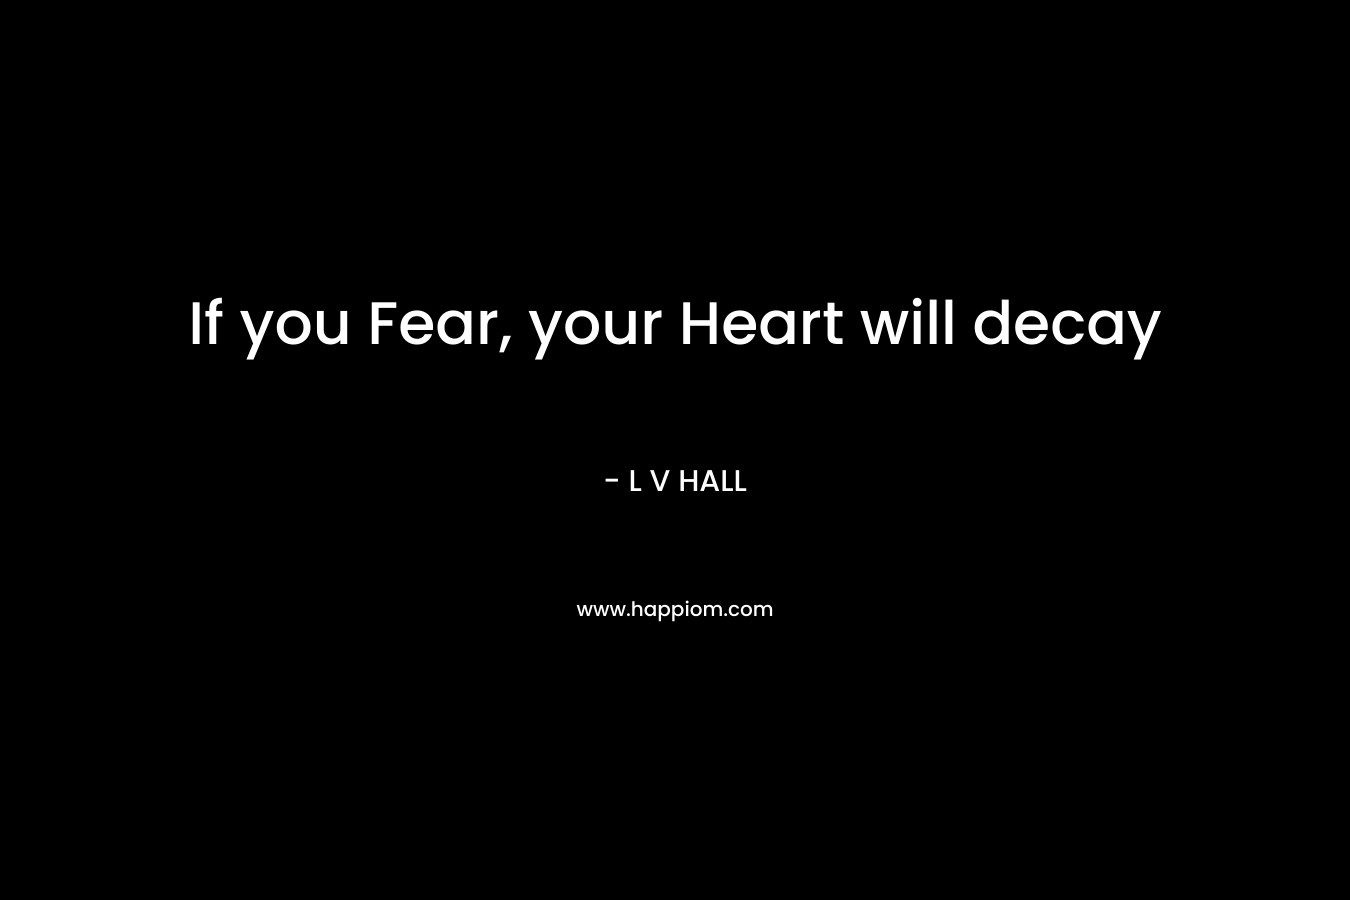 If you Fear, your Heart will decay